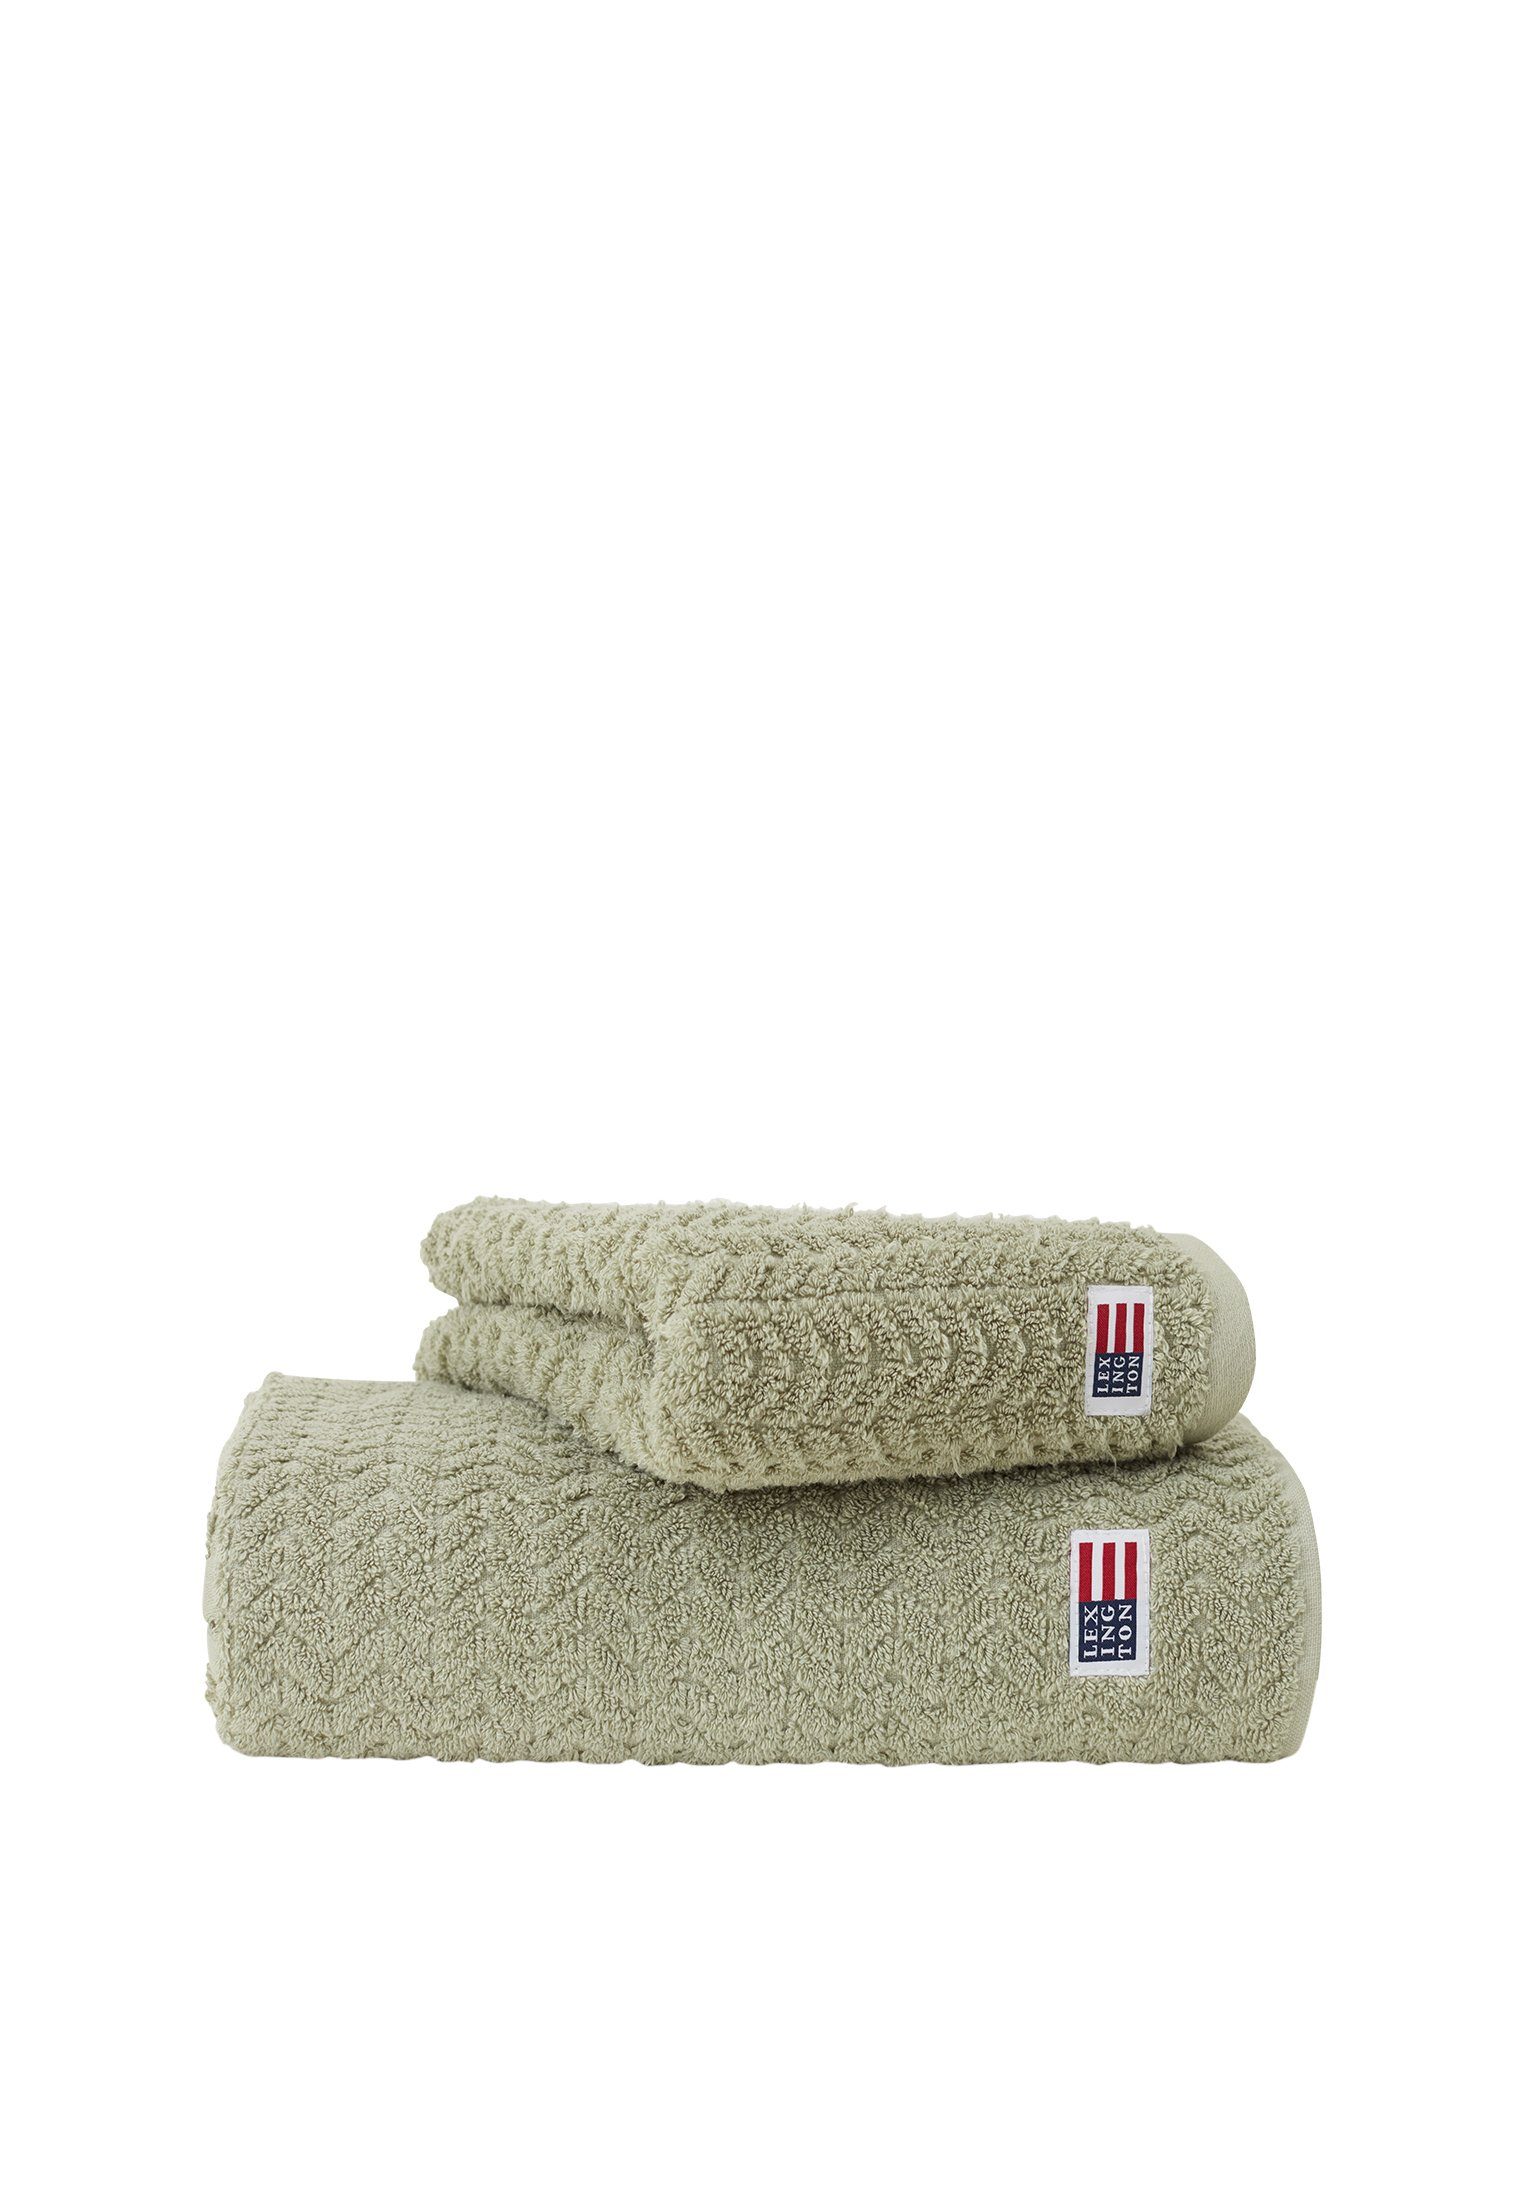 Cotton/Lyocell green Structured Lexington vintage Terry Towel Handtuch